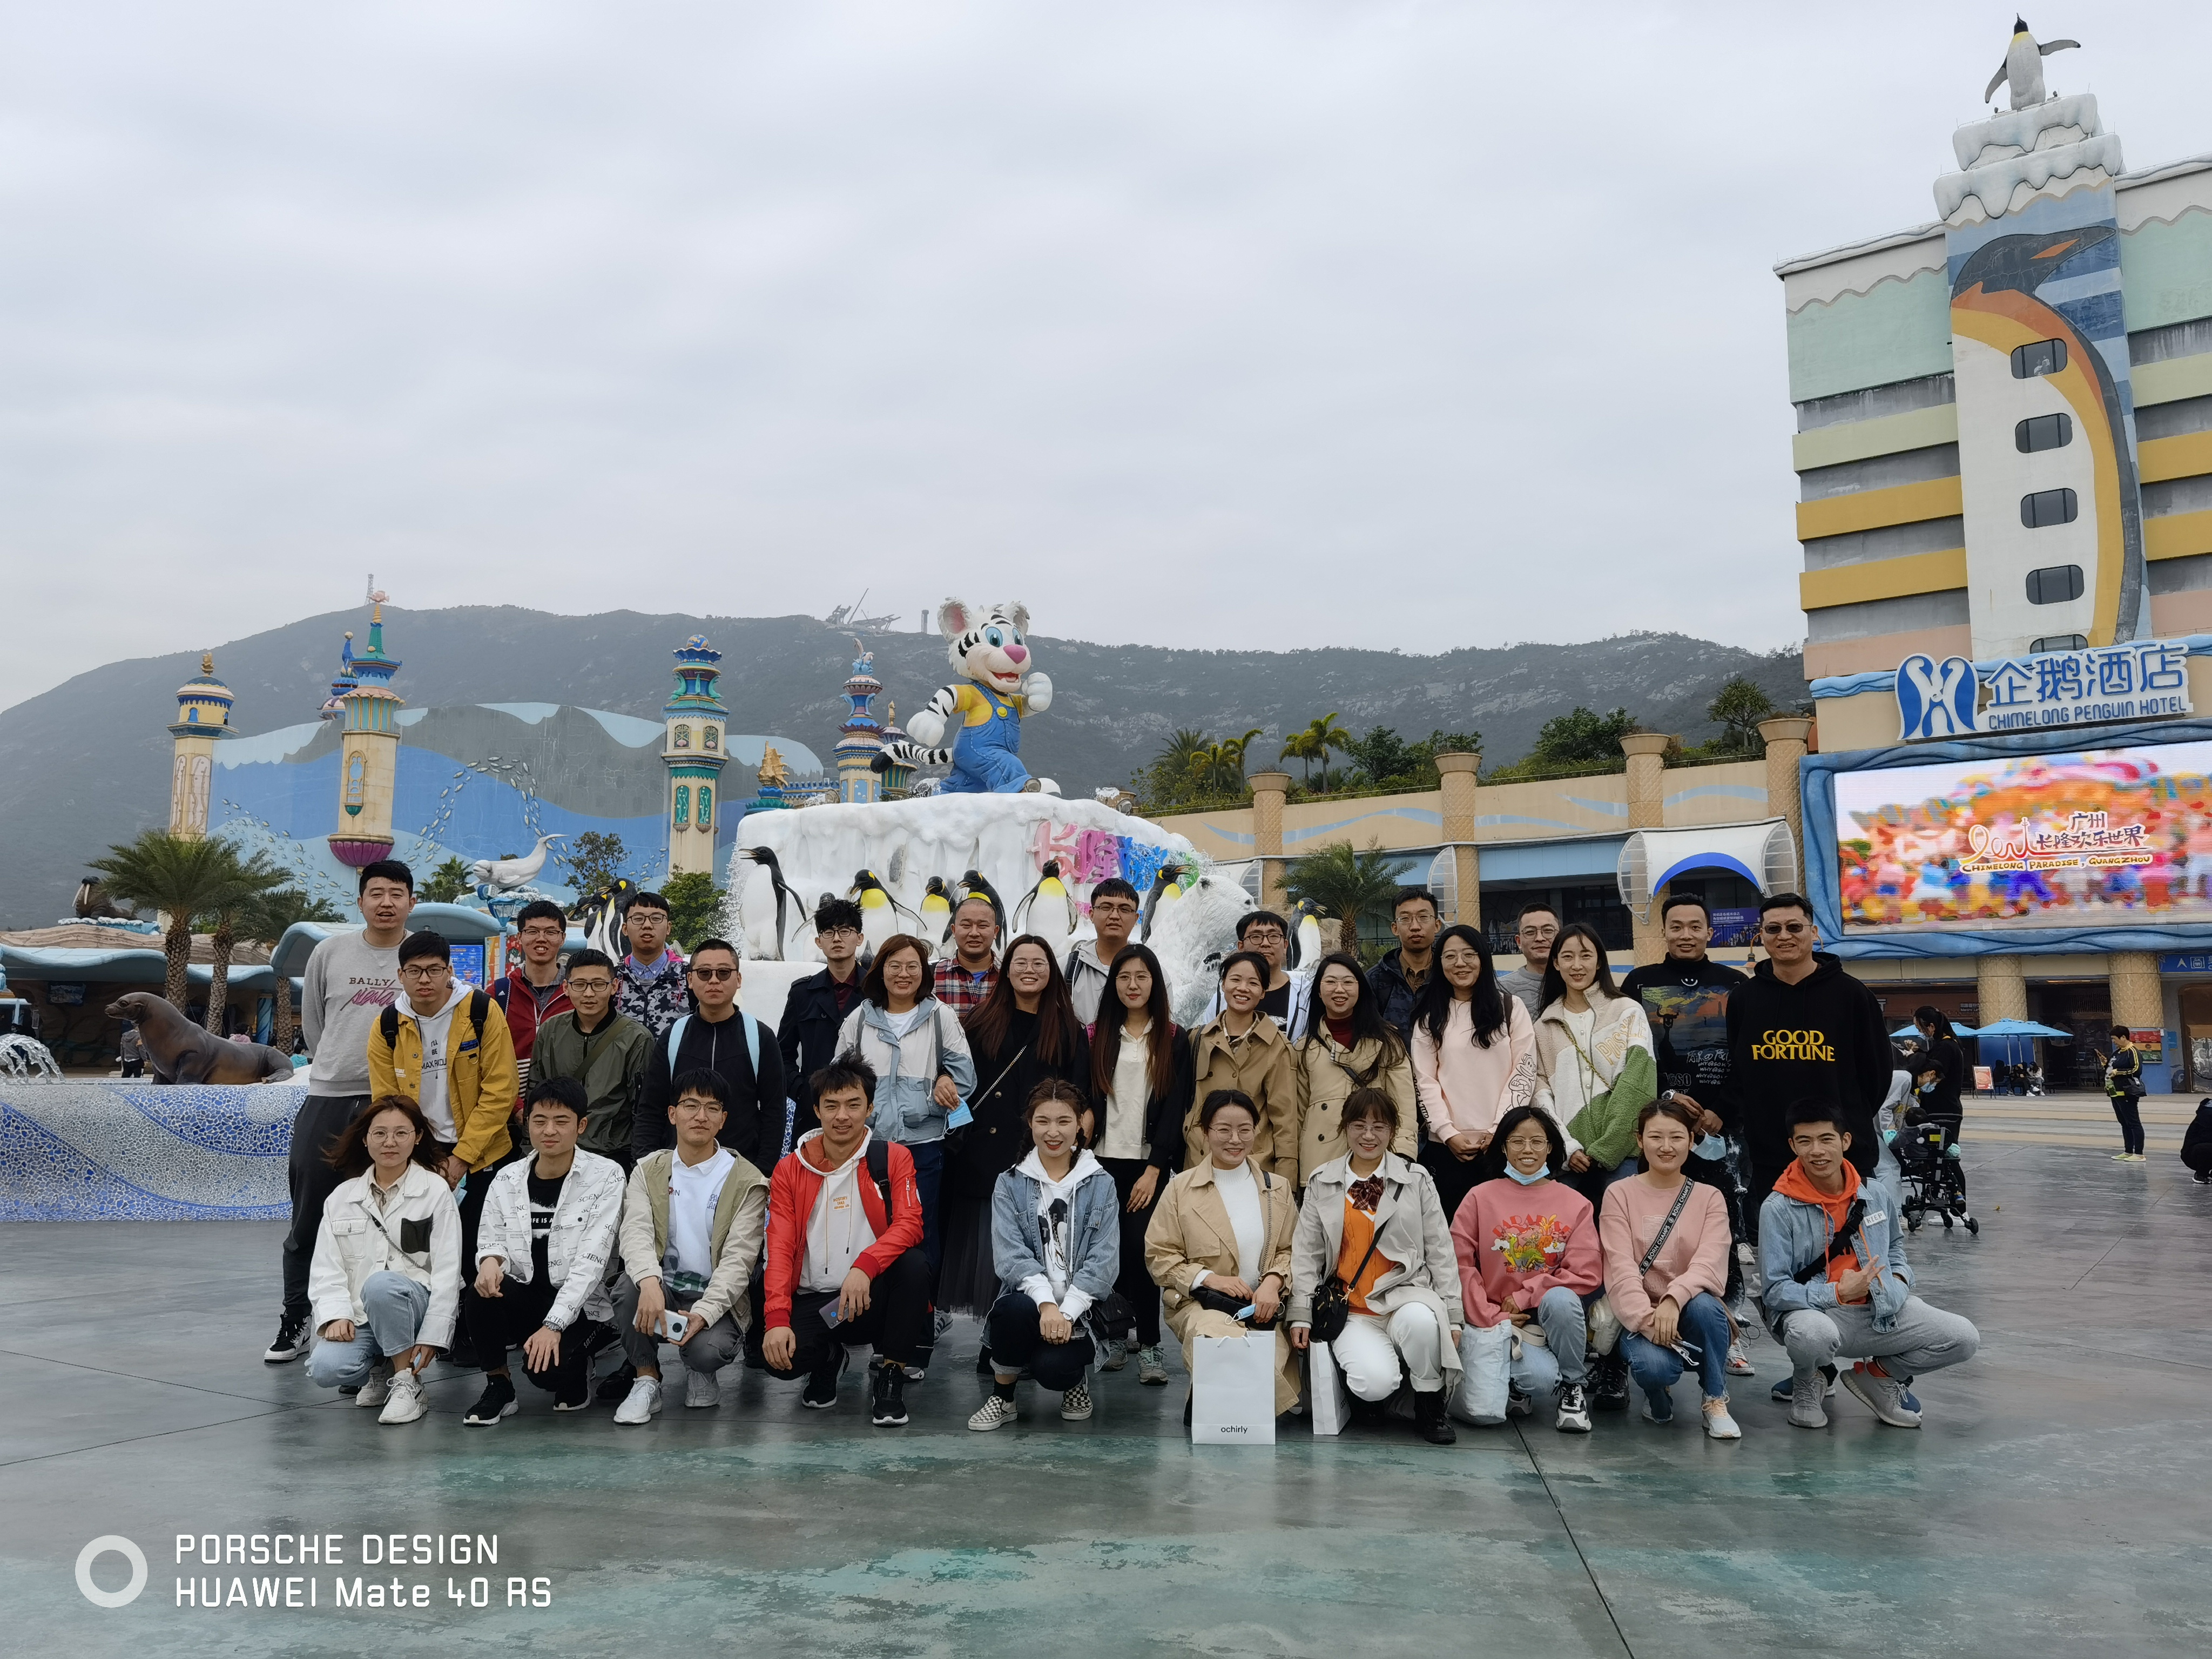 Fang Group at Chimelong Ocean Kingdom, Zhuhai in the winter of 2020